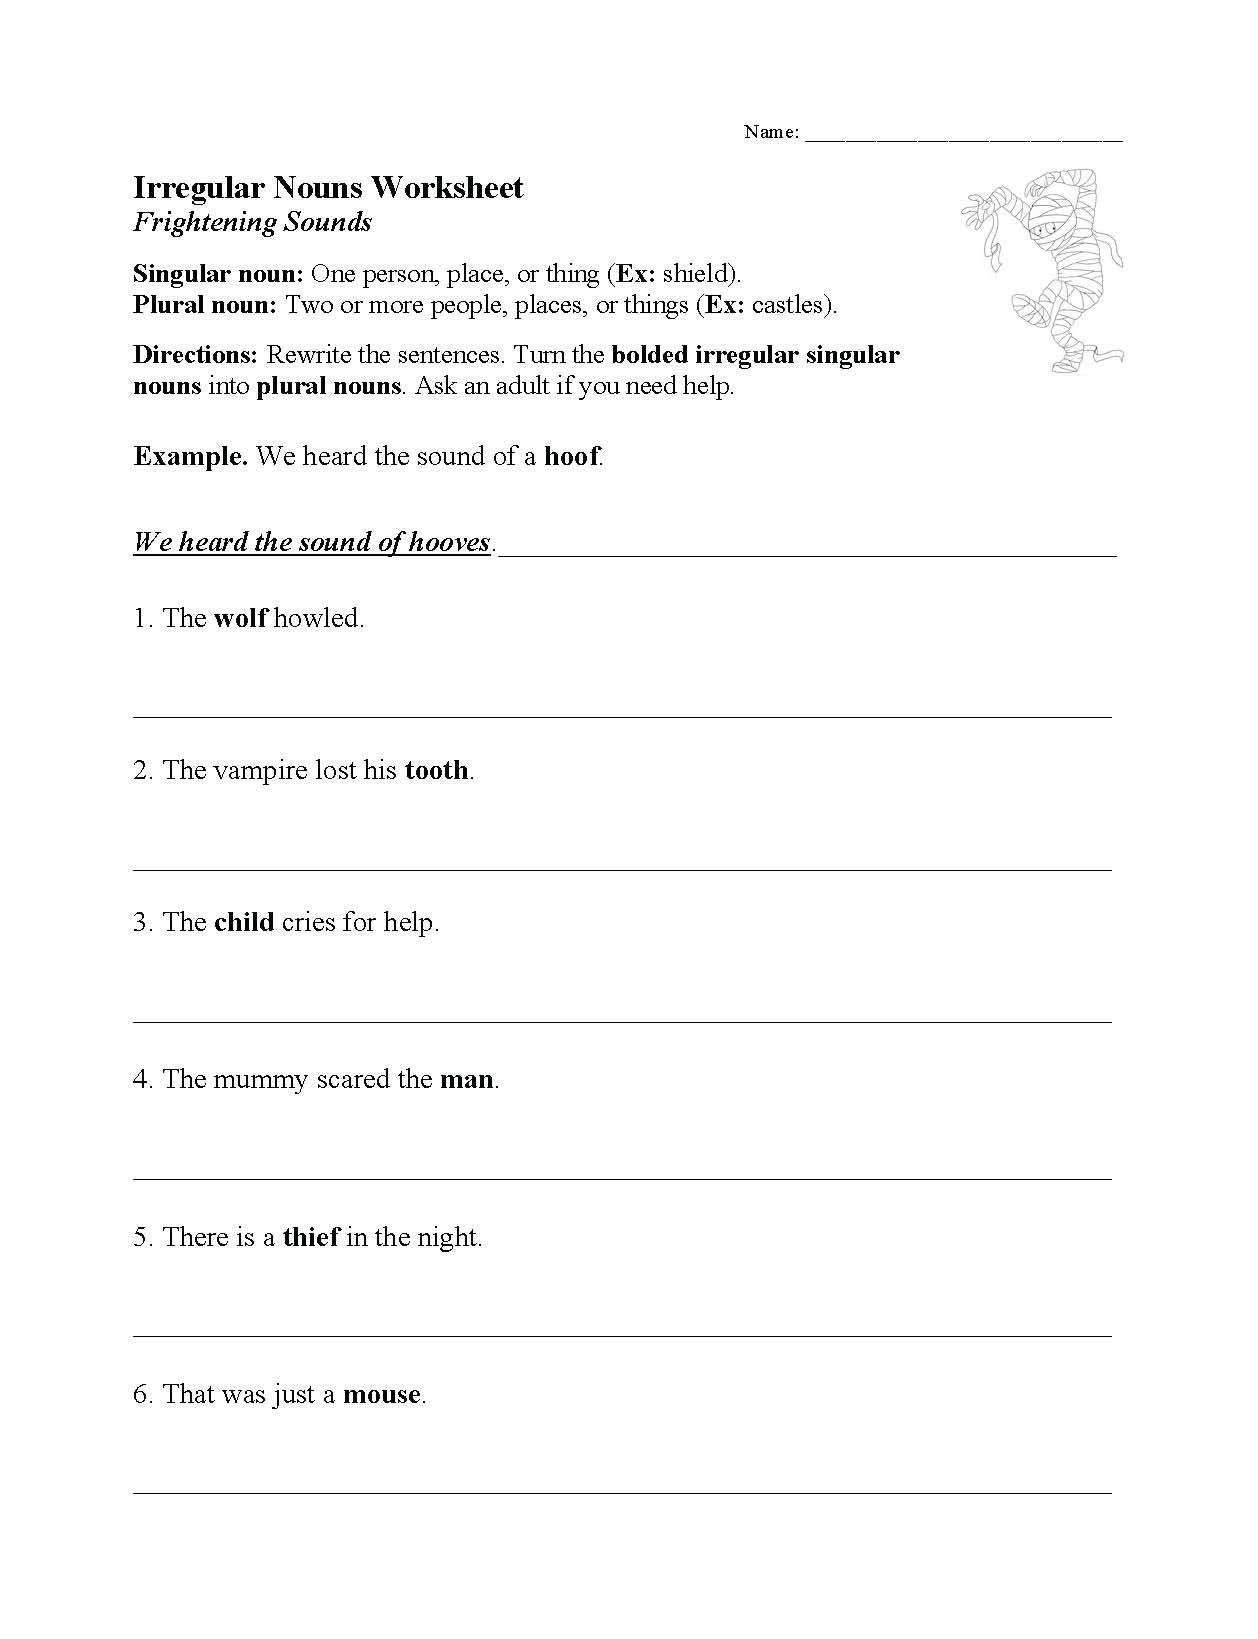 This is a preview image of our Irregular Nouns Worksheet. Click on it to enlarge this image and view the source file.